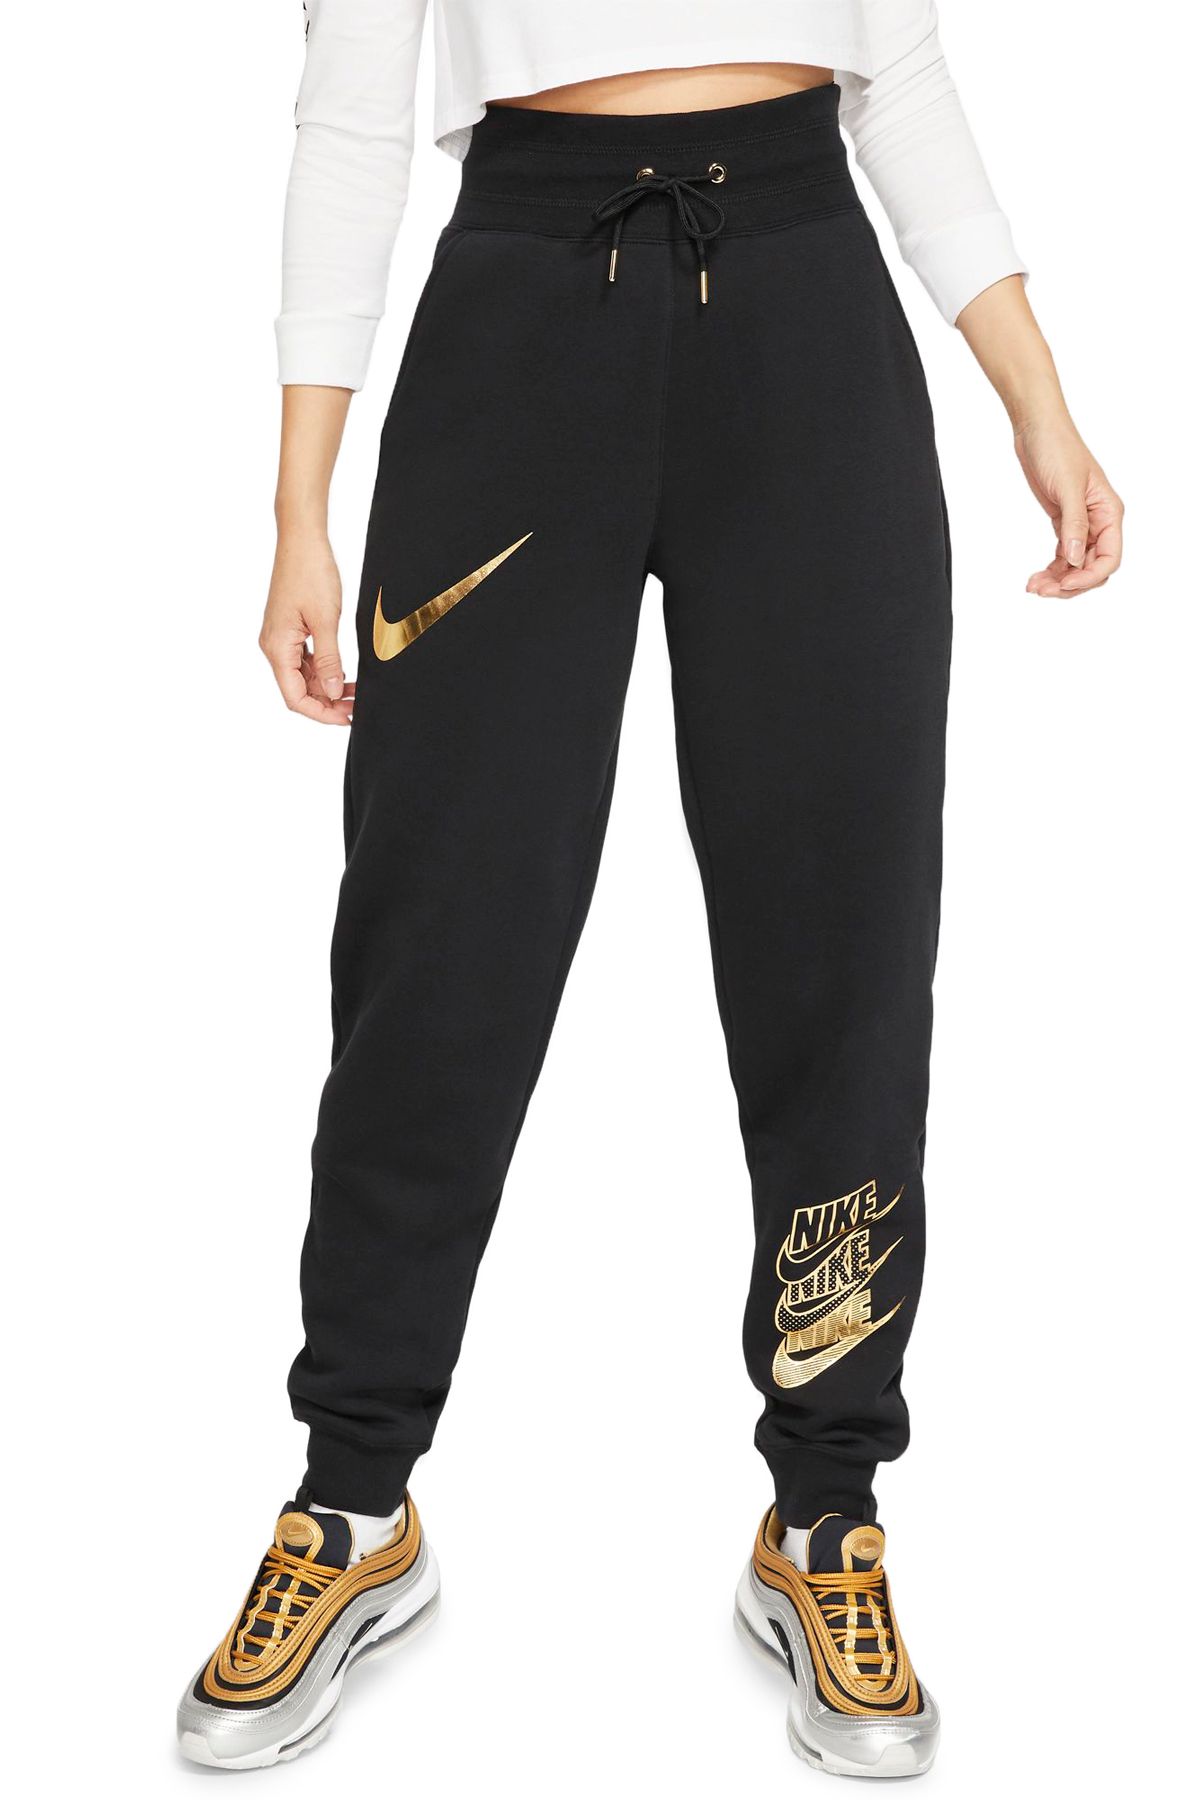 black and gold nike bottoms